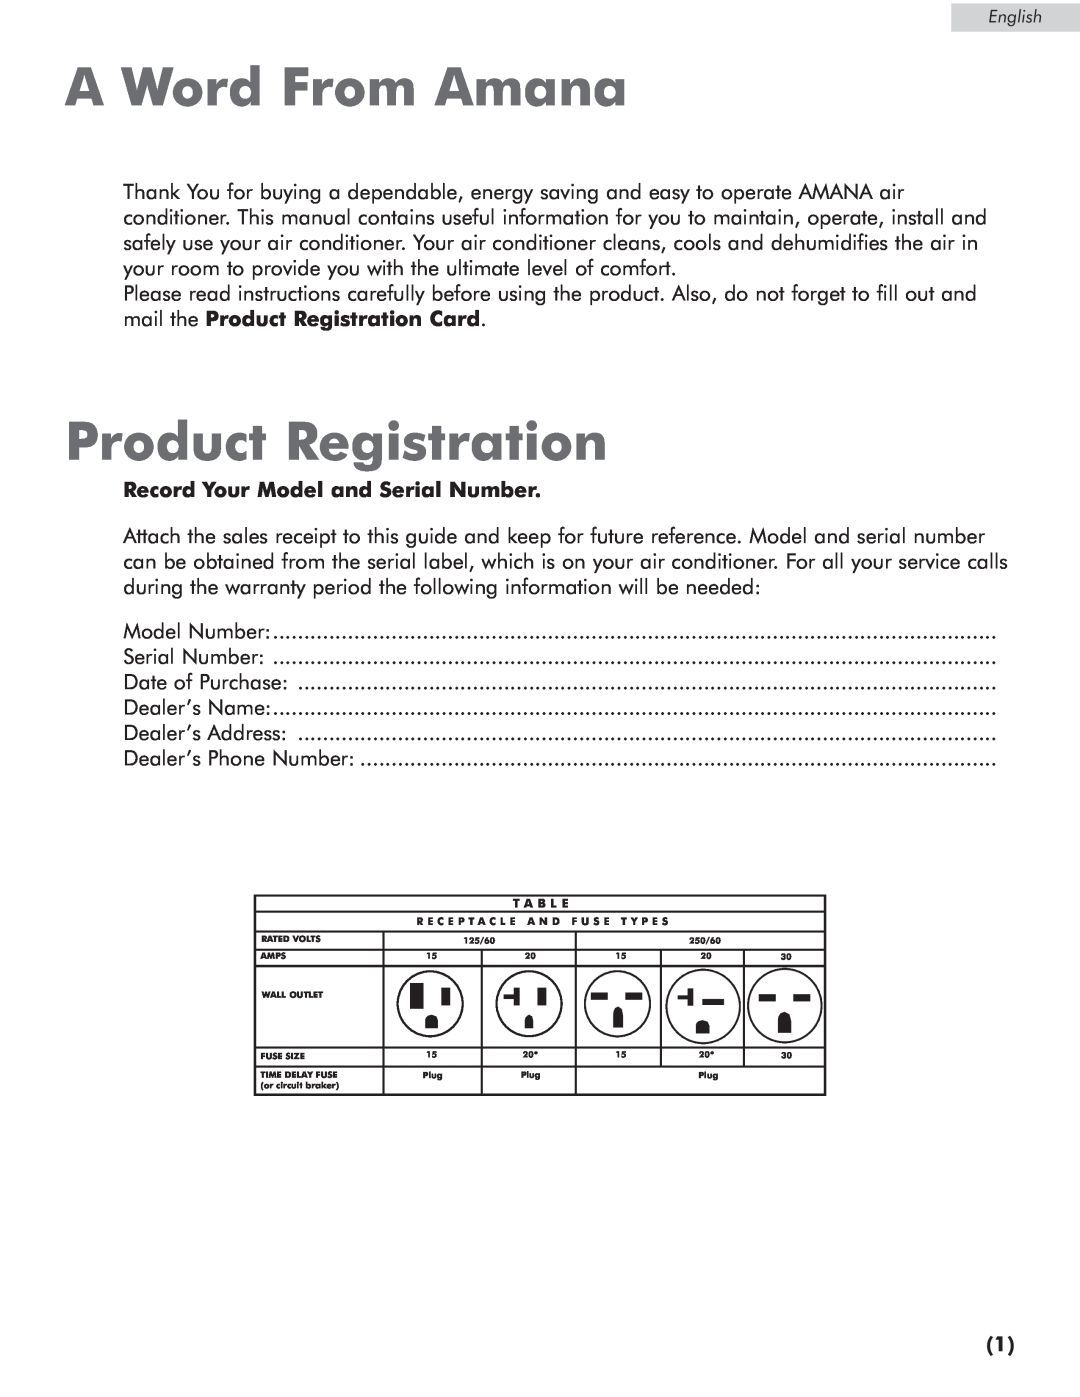 Amana AP076E manual A Word From Amana, Product Registration, Record Your Model and Serial Number 